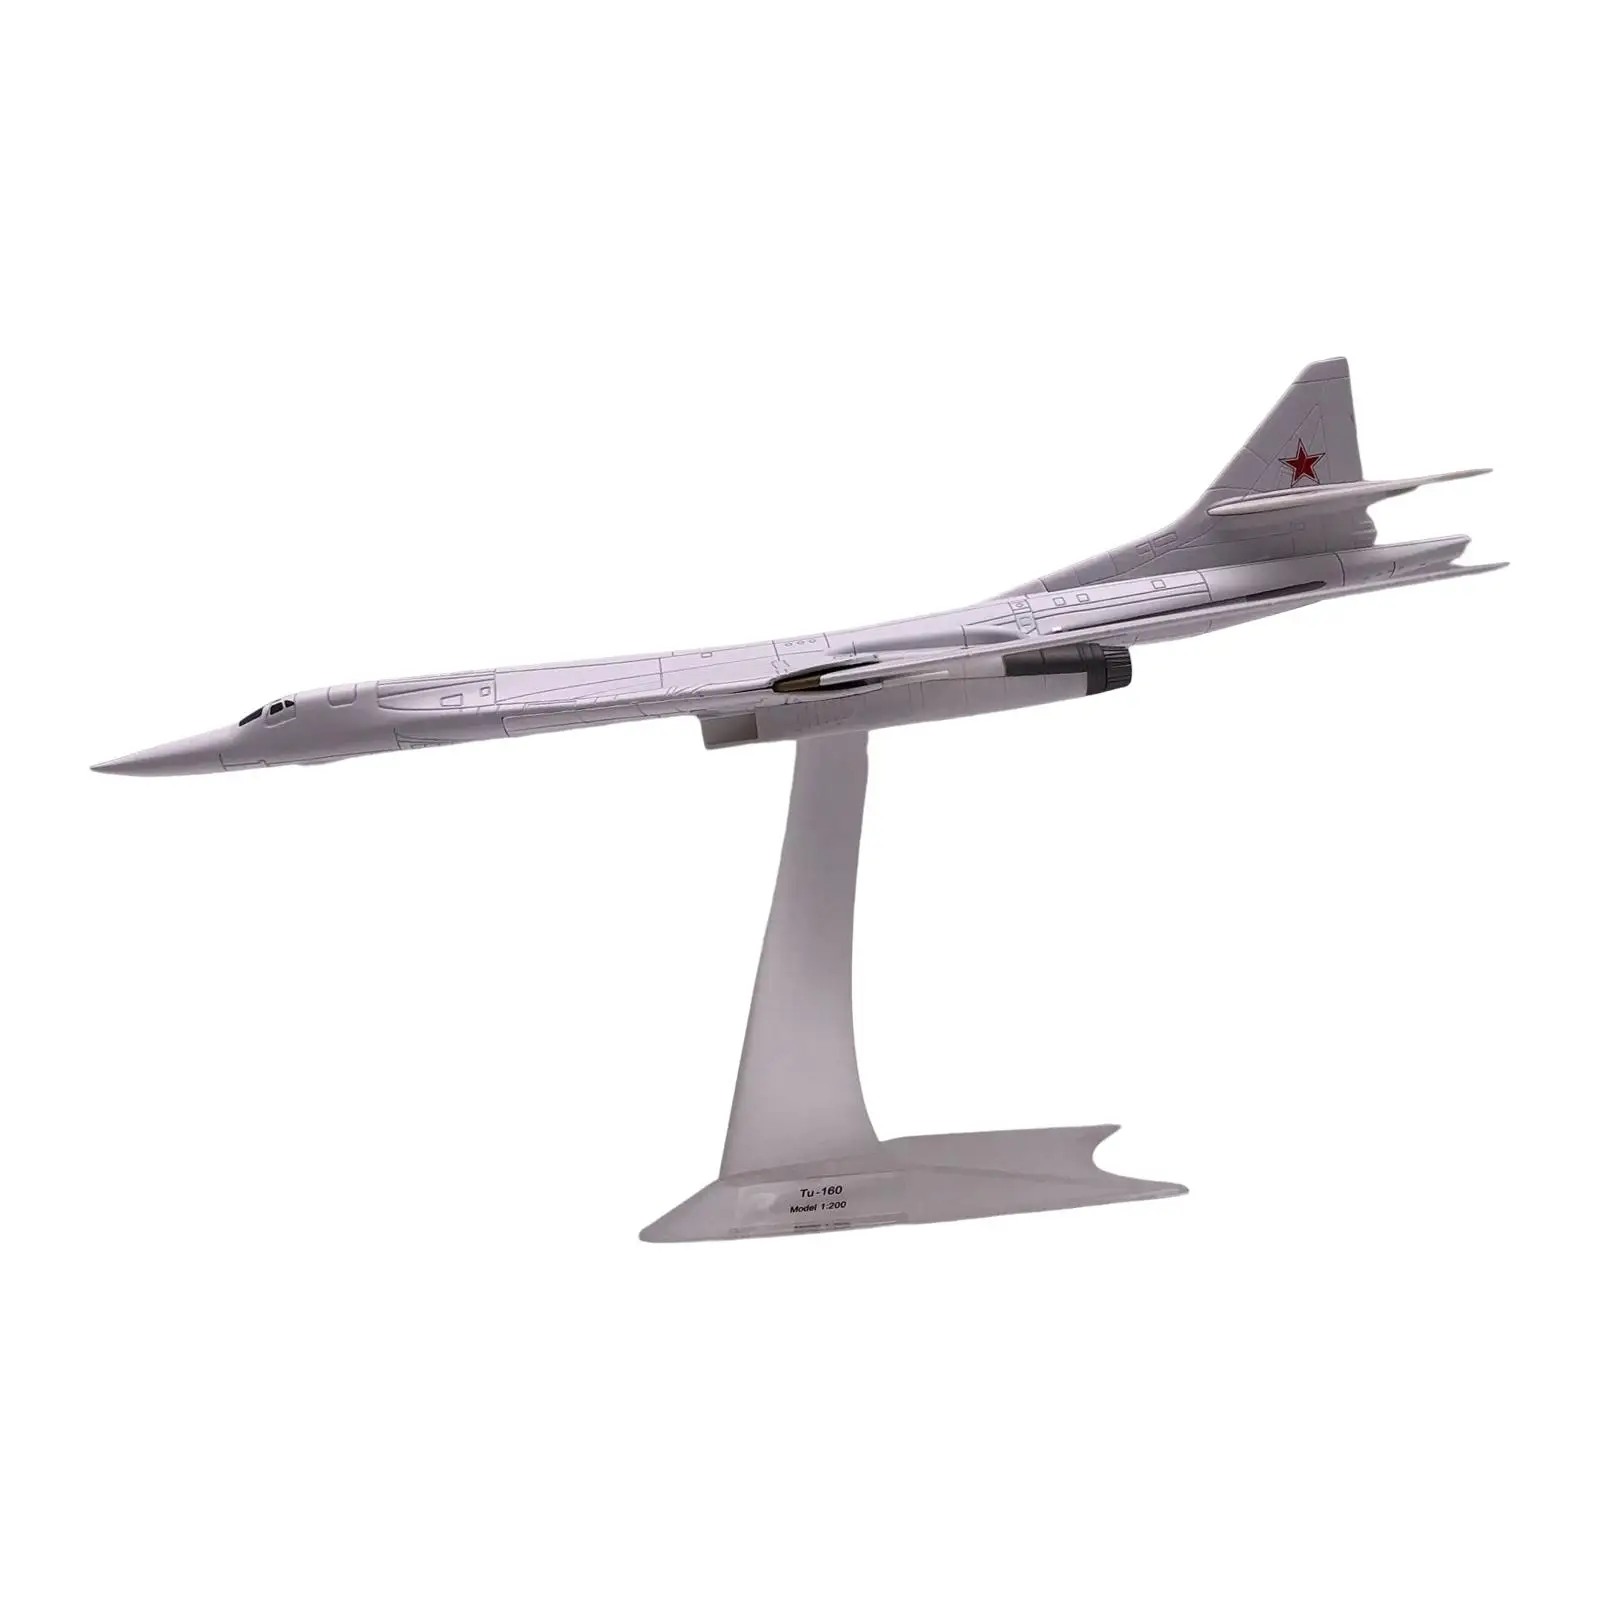 3D Bomber Fighter Model Plain Fighter Toy 1:200 Scale Air Planes Diecast